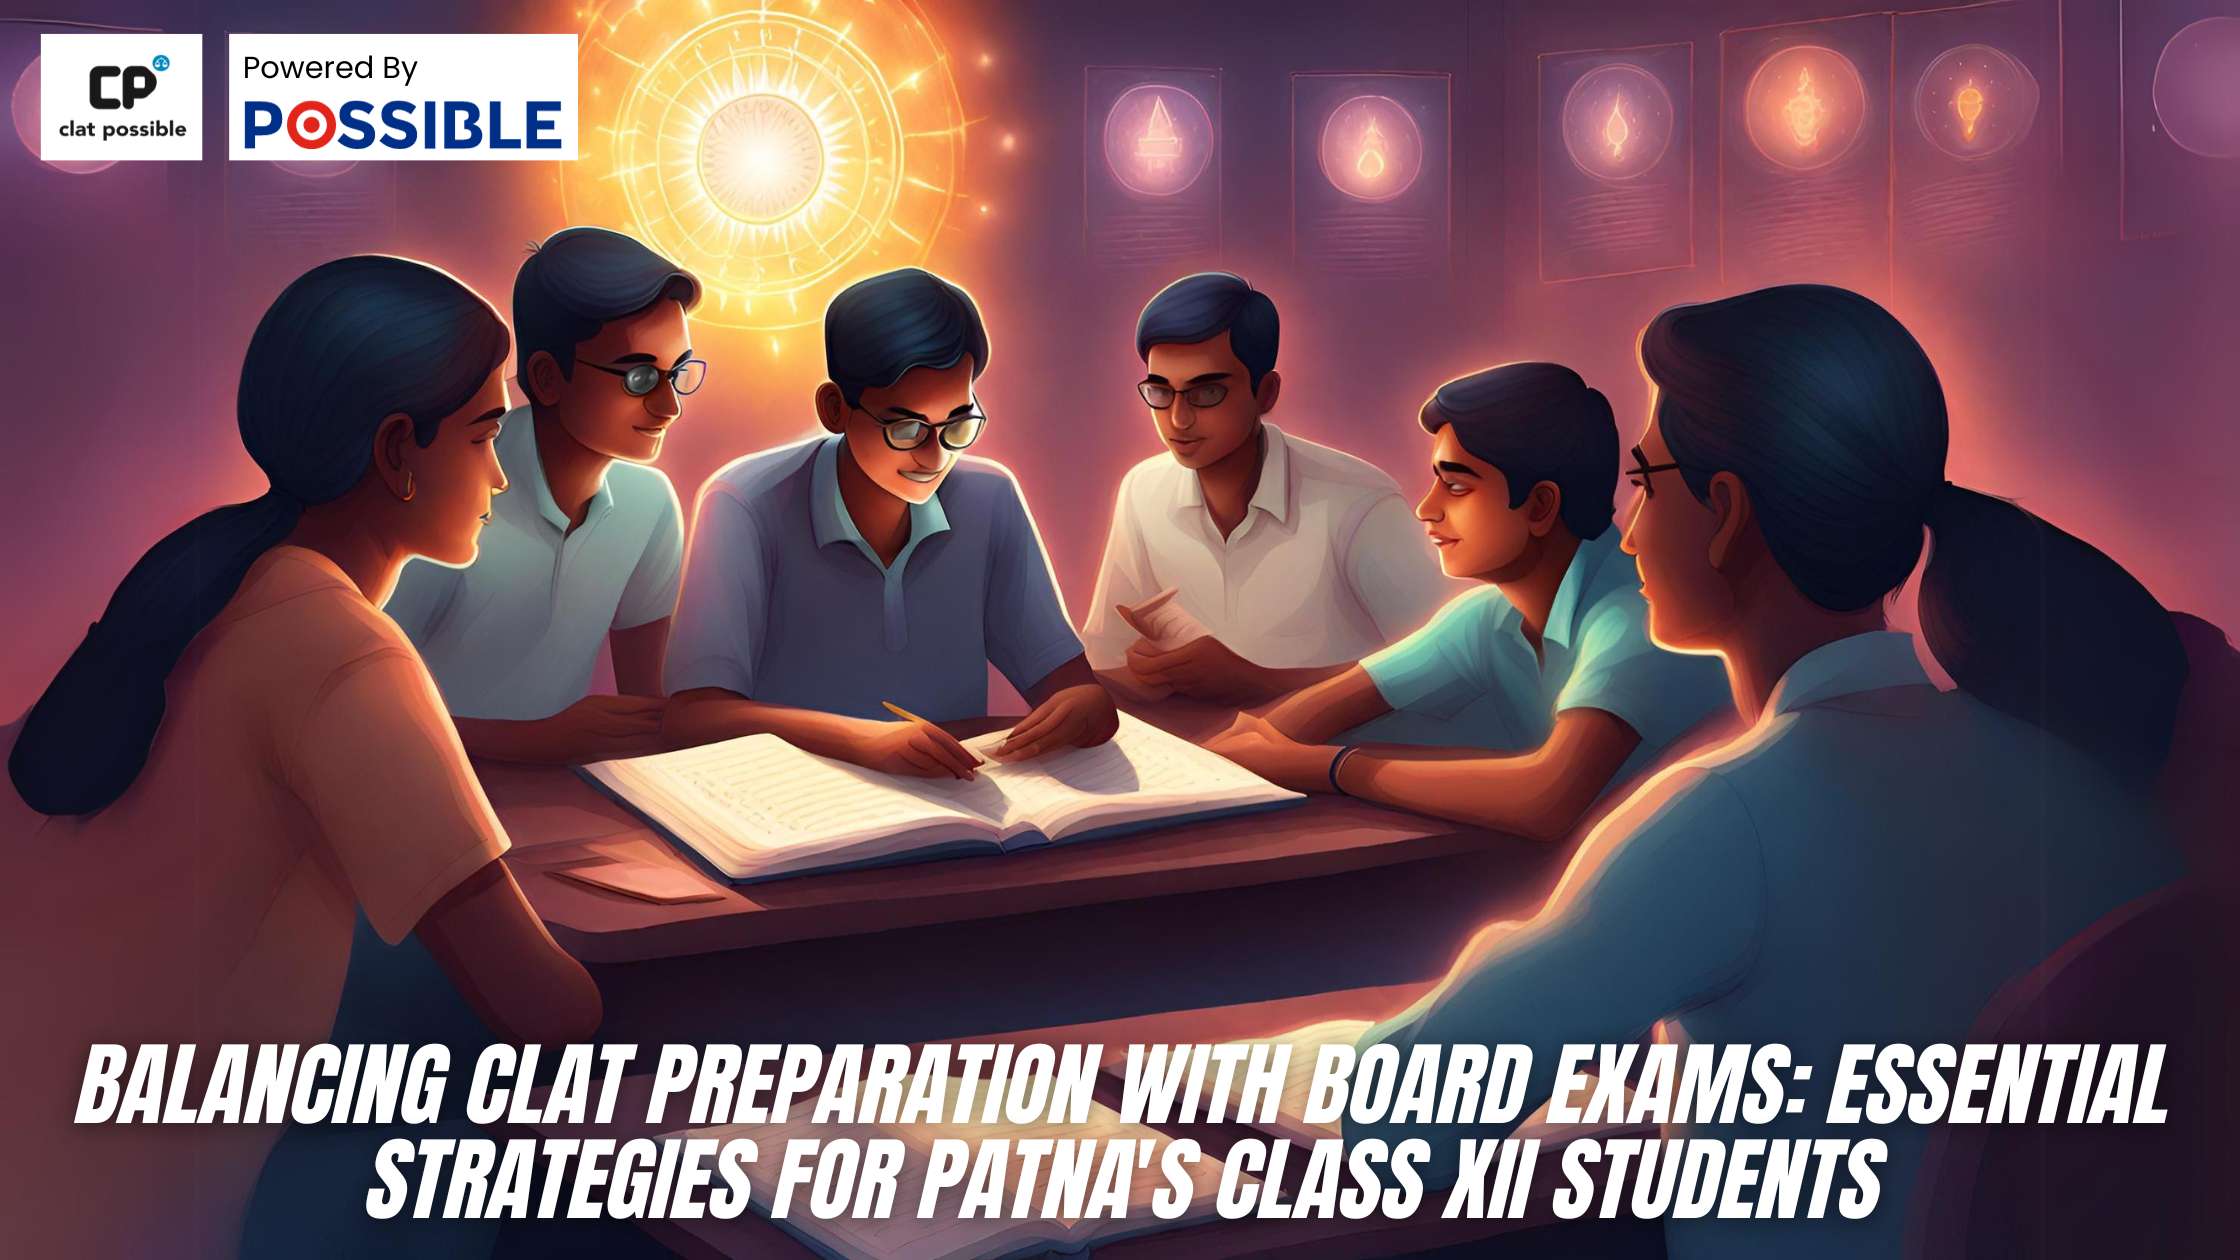 Essential Strategies for Patna's Class XII Students